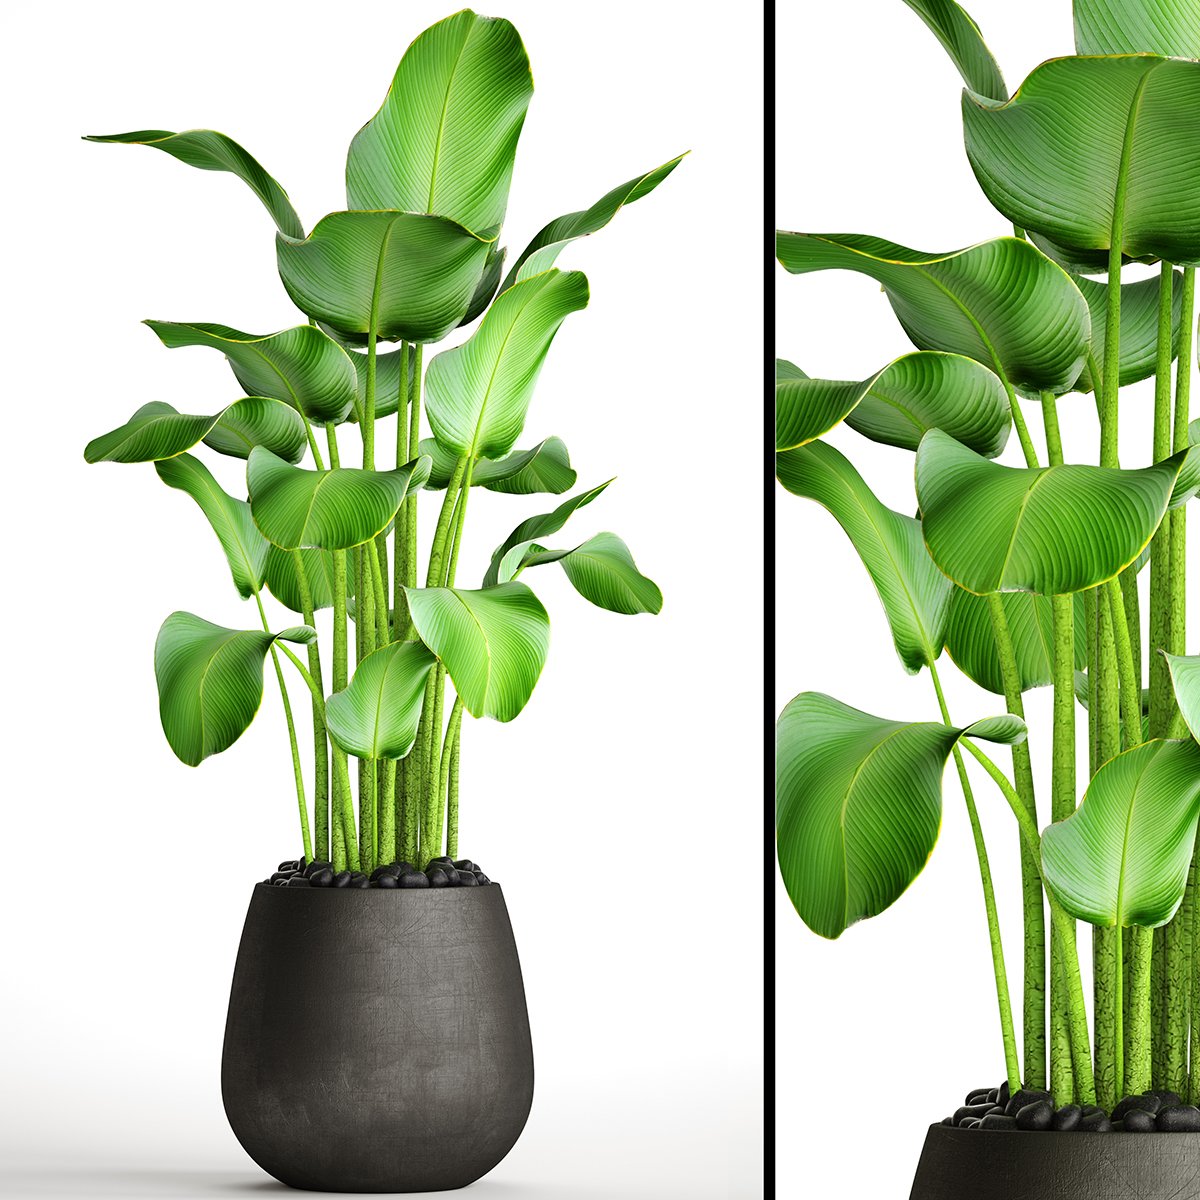 3ds max plants models free download